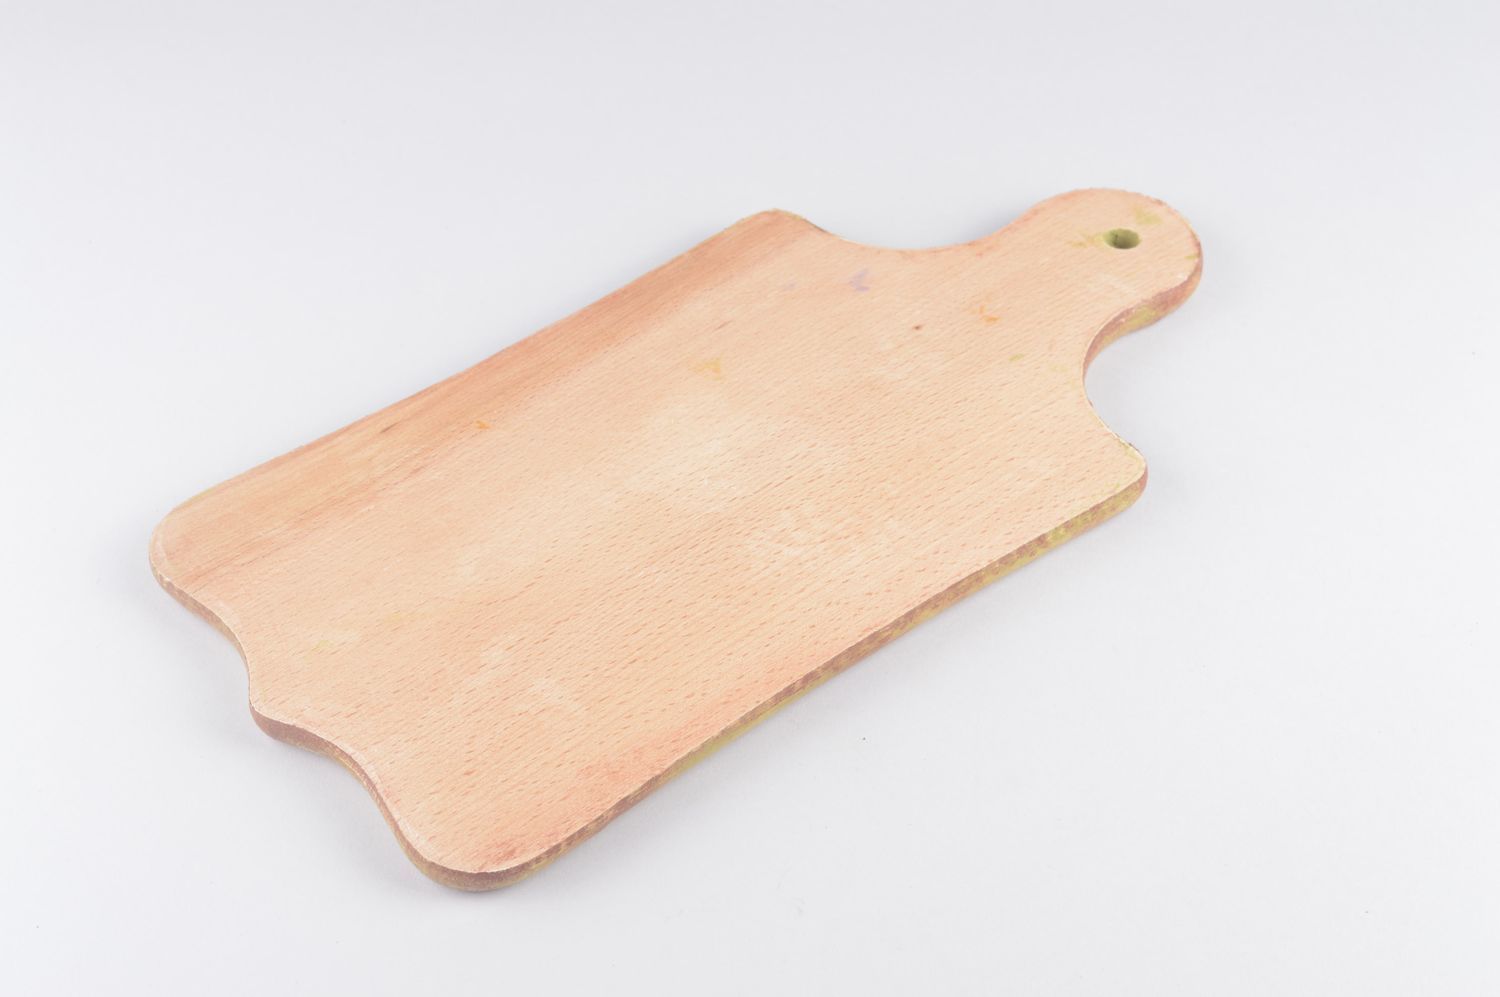 Handmade wooden kitchen board chopping board for decorative use only gift ideas photo 2